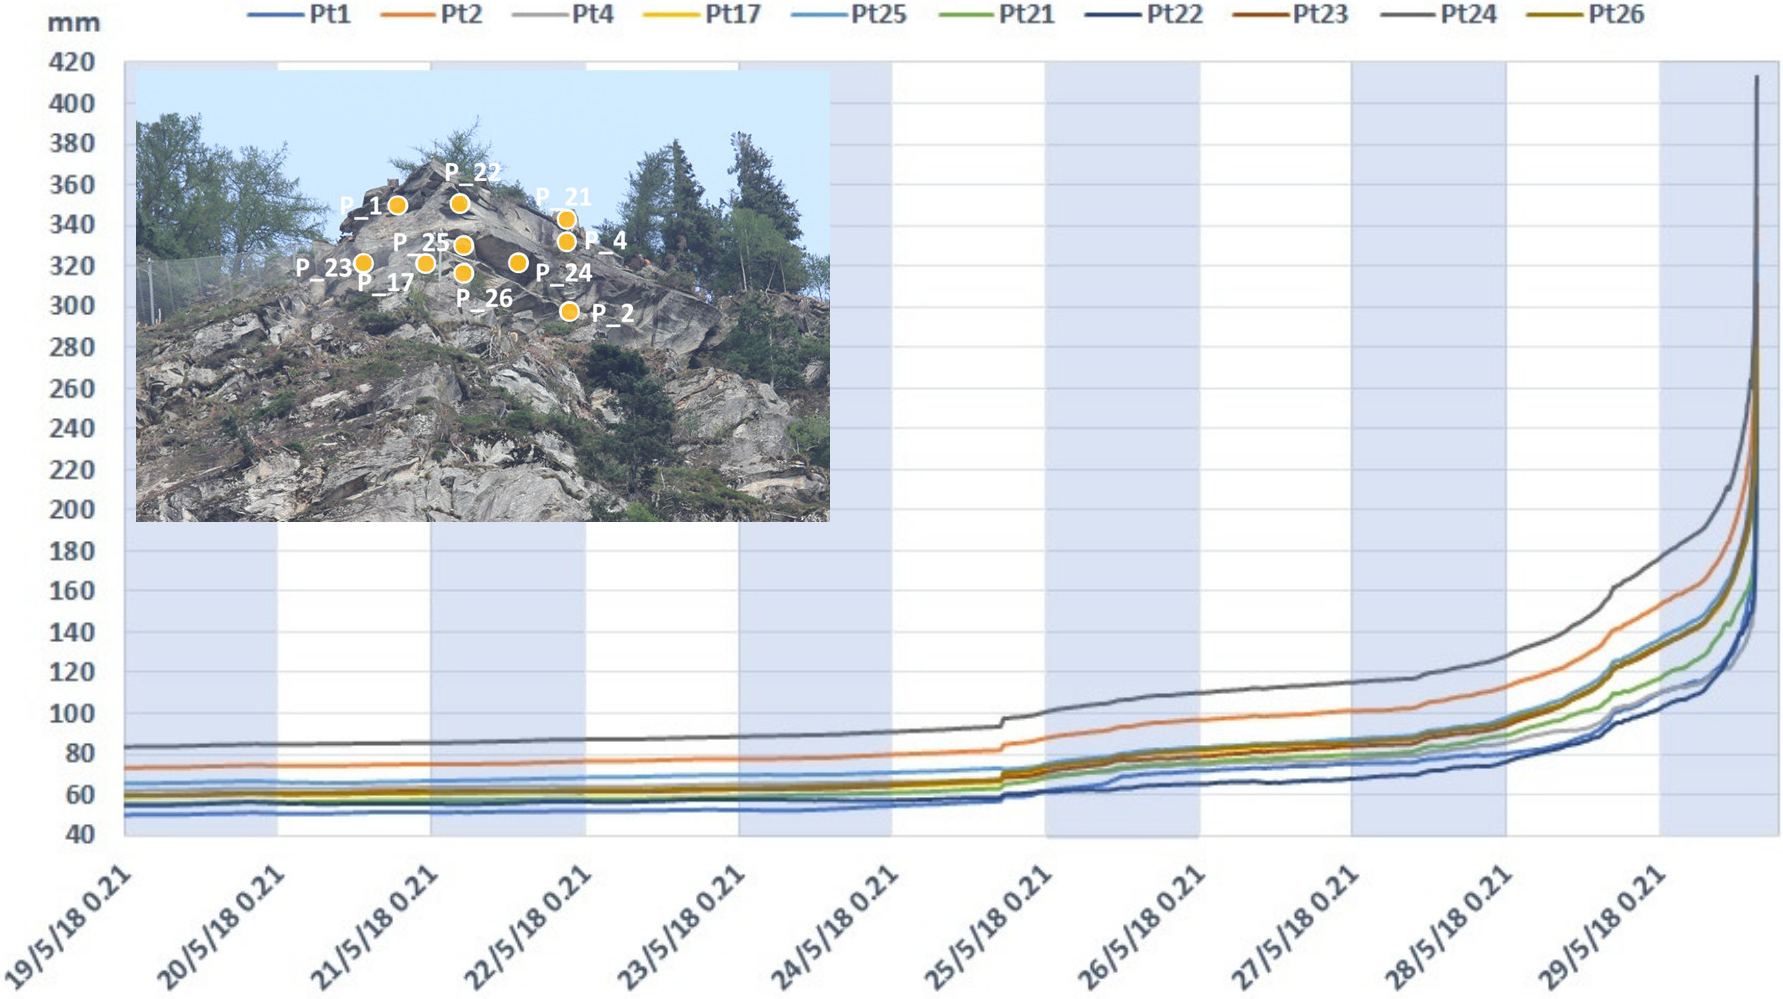 Gh Geological Monitoring Networks For Risk Management Close To Large Rock Cliffs The Case History Of Gallivaggio And Cataeggio In The Italian Alps